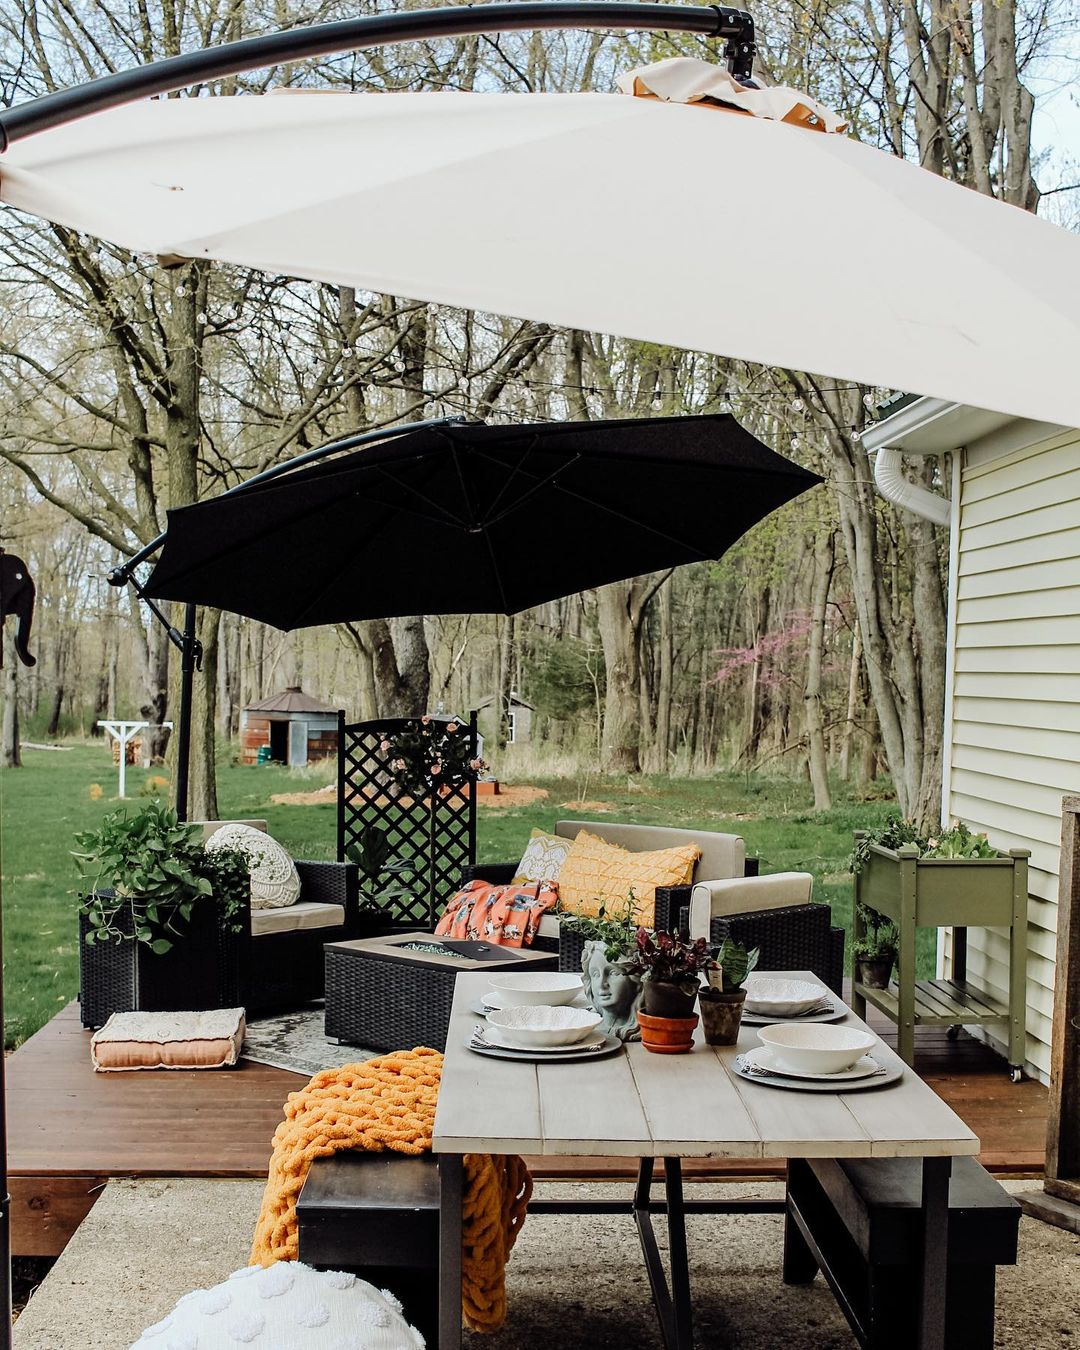 Backyard Patio with Large Umbrellas Hanging Overhead. Photo by Instagram user @twopawsfarmhouse